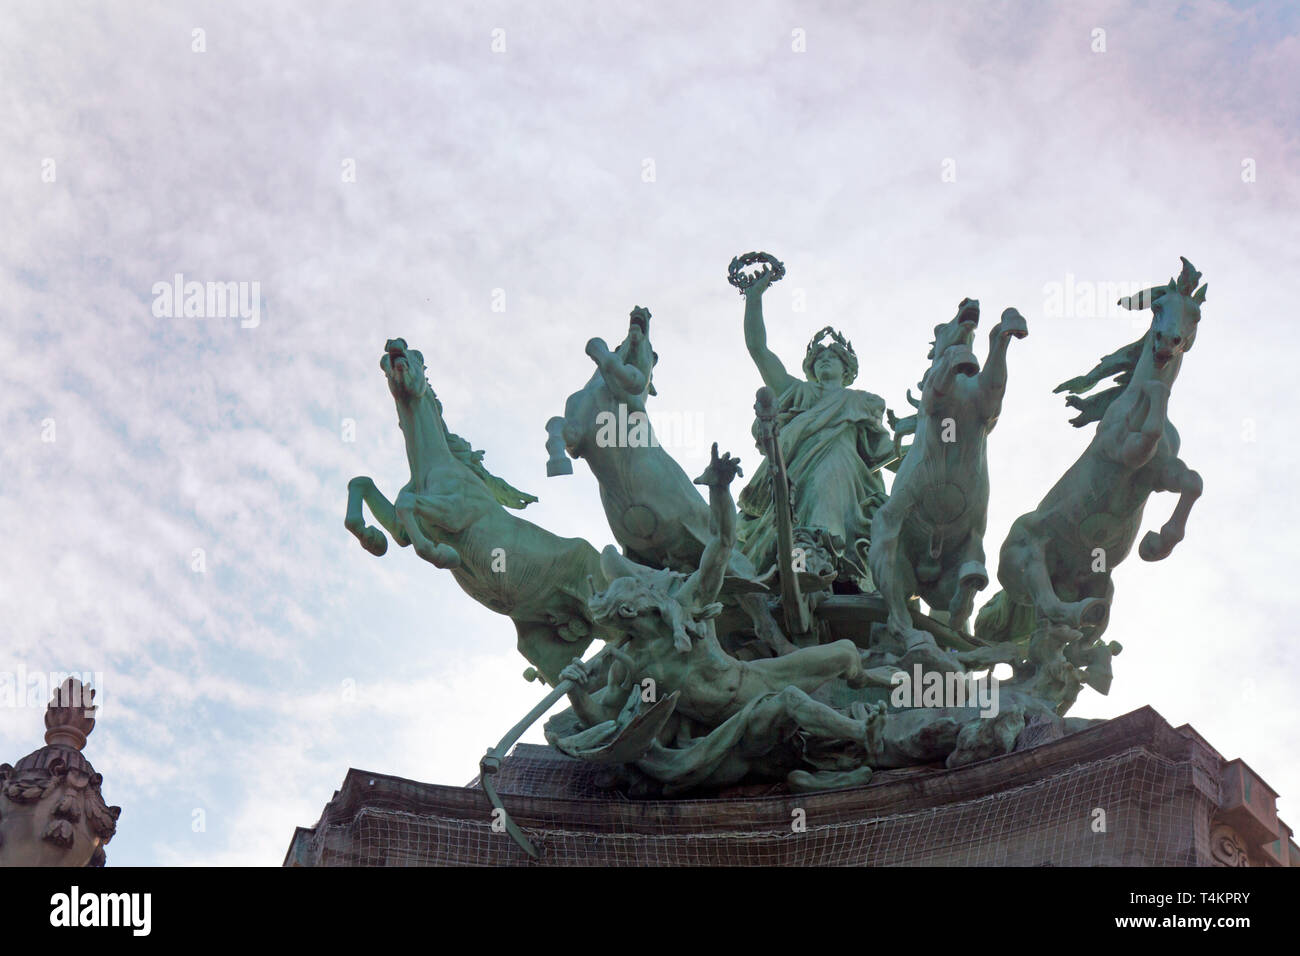 Paris, France - September 22, 2017: Sculpture of victorious four horses, winged genius, characteristic motif of Quadriga Imperial power. Immortality o Stock Photo